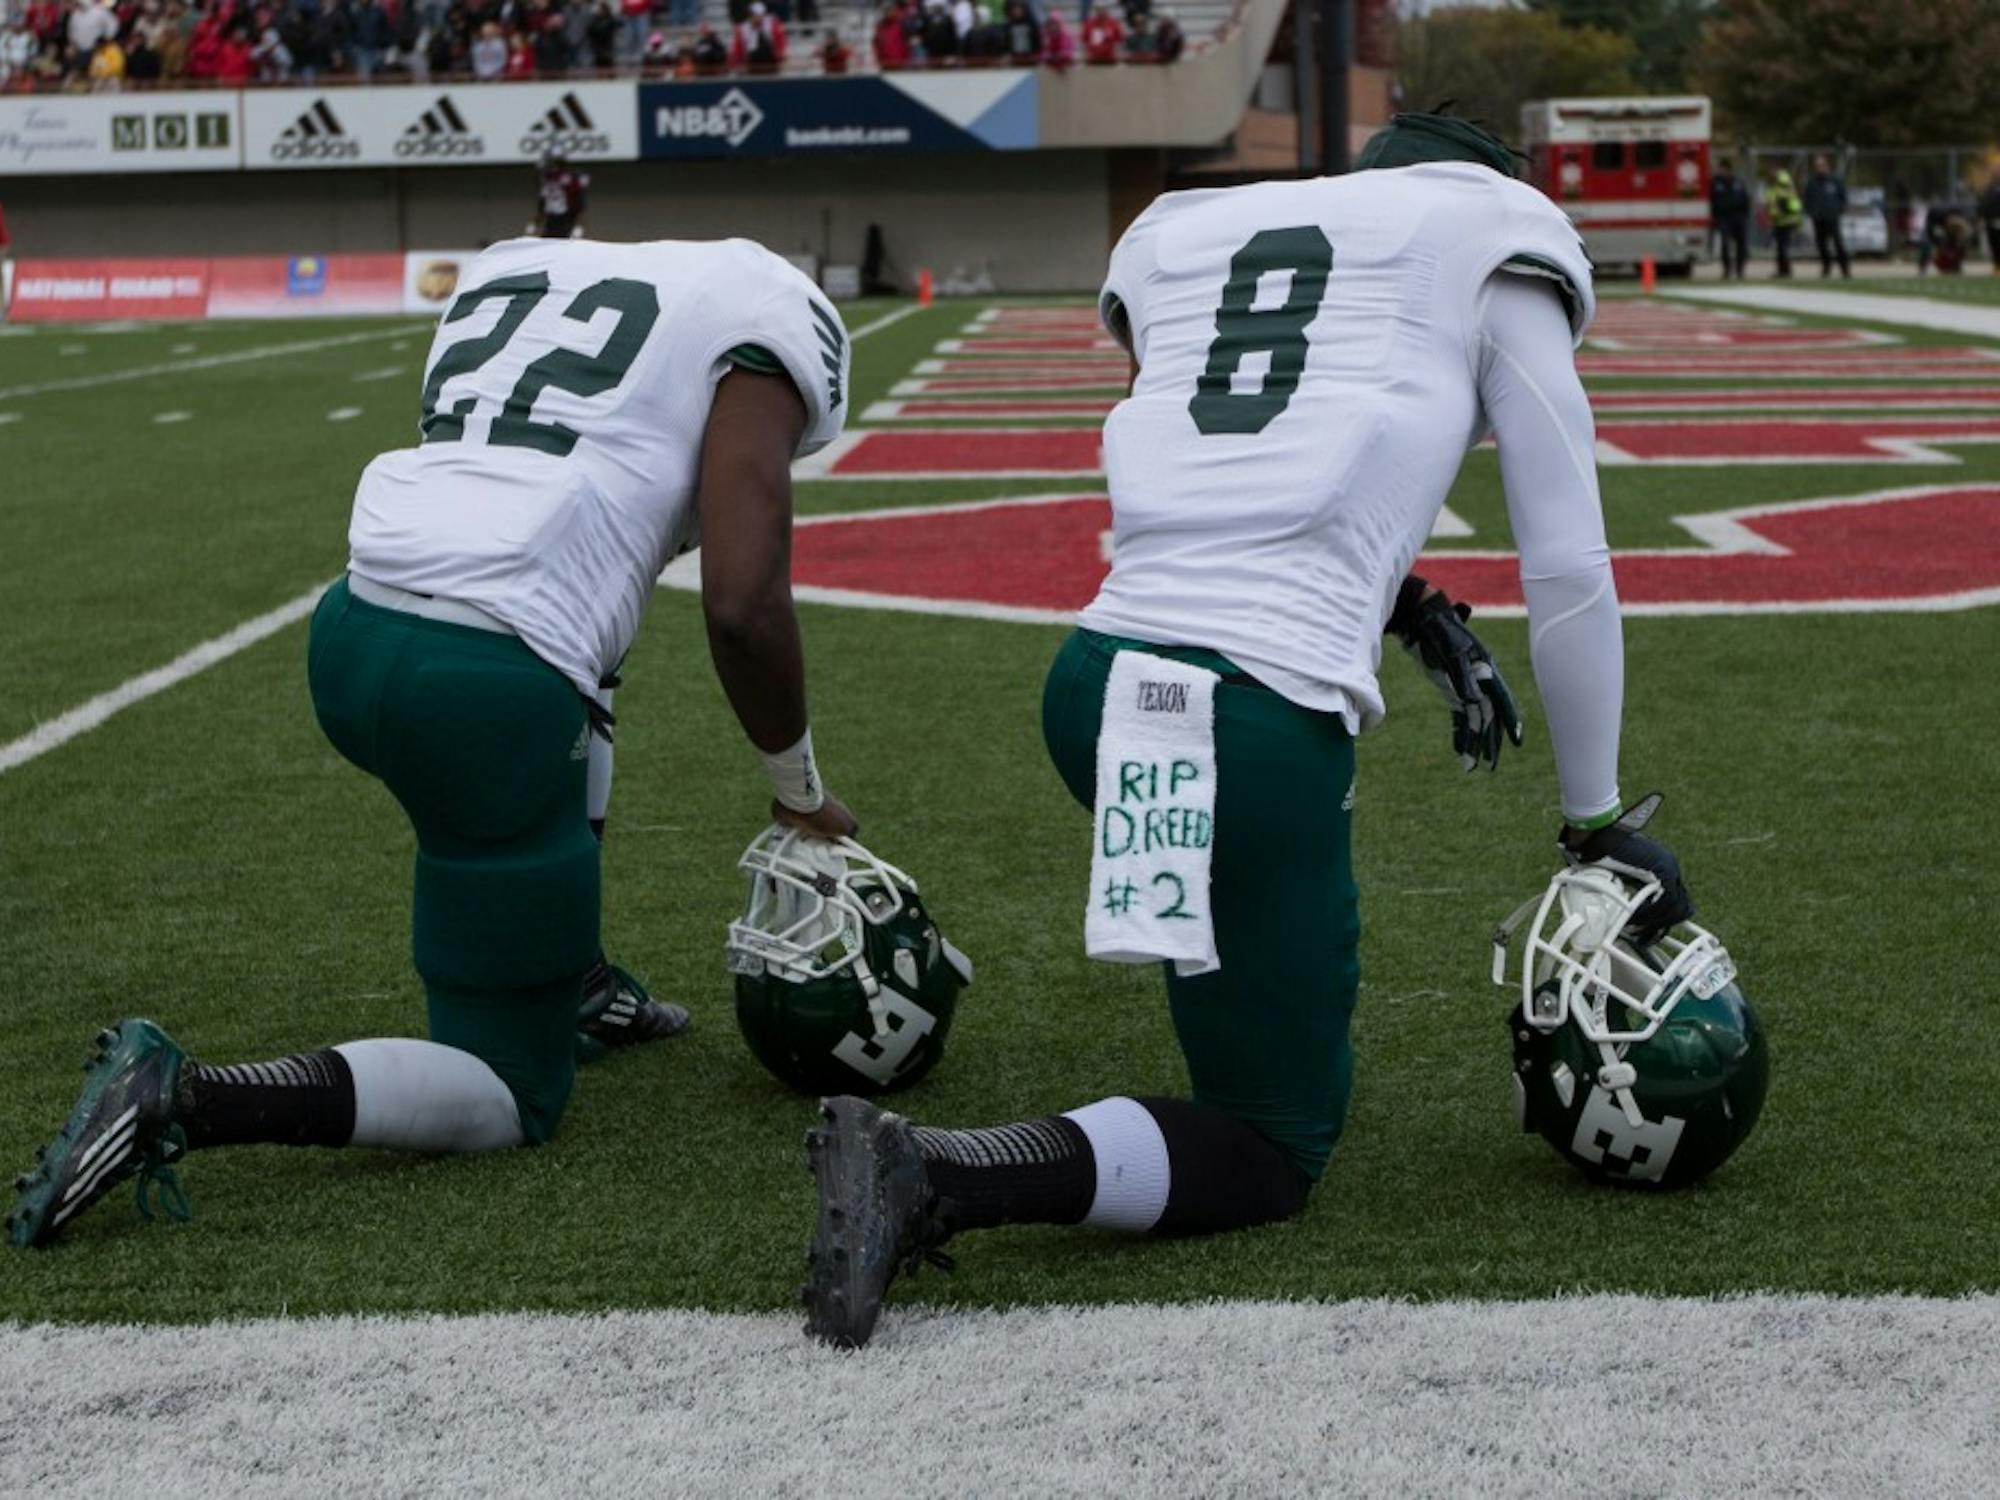 Eastern Michigan players Ryan Brumfield and Quincy Jones take a moment to reflect on the events of the past week before EMU took on Northern Illinois Saturday in Dekalb the day after the team went to Demarius Reeds visitation service in Chicago.